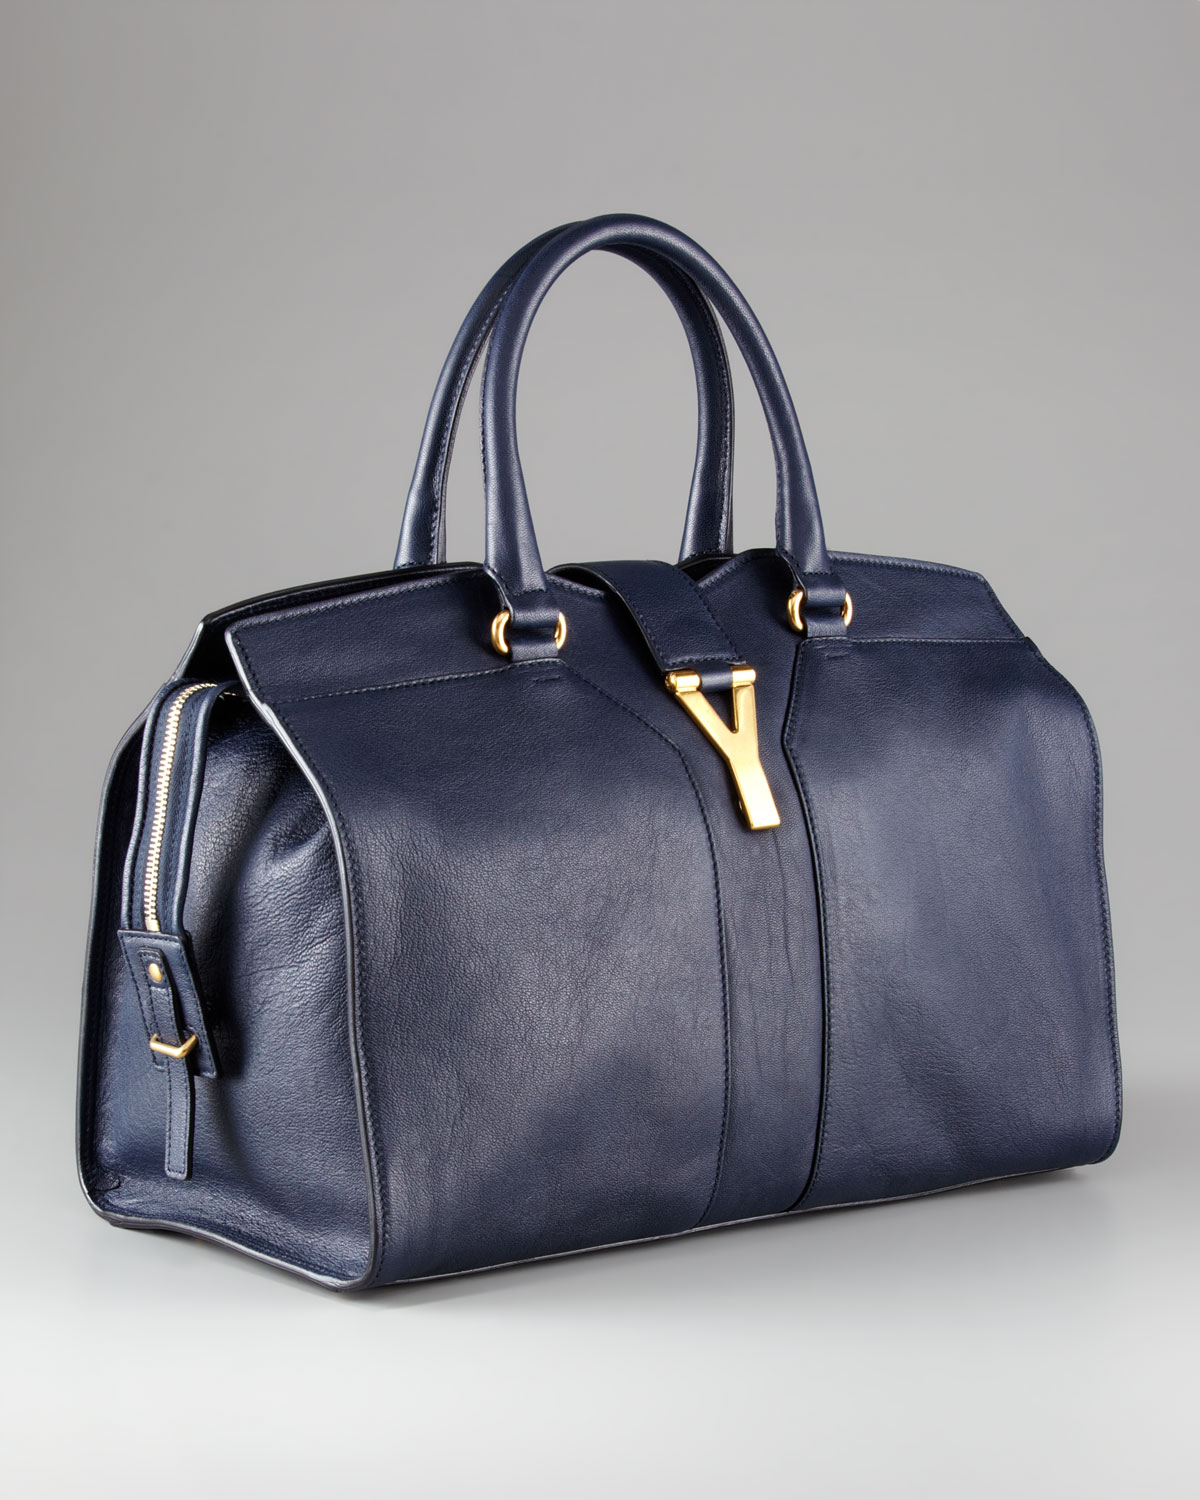 Saint laurent Cabas Chyc Medium Extra-wide Tote in Blue | Lyst